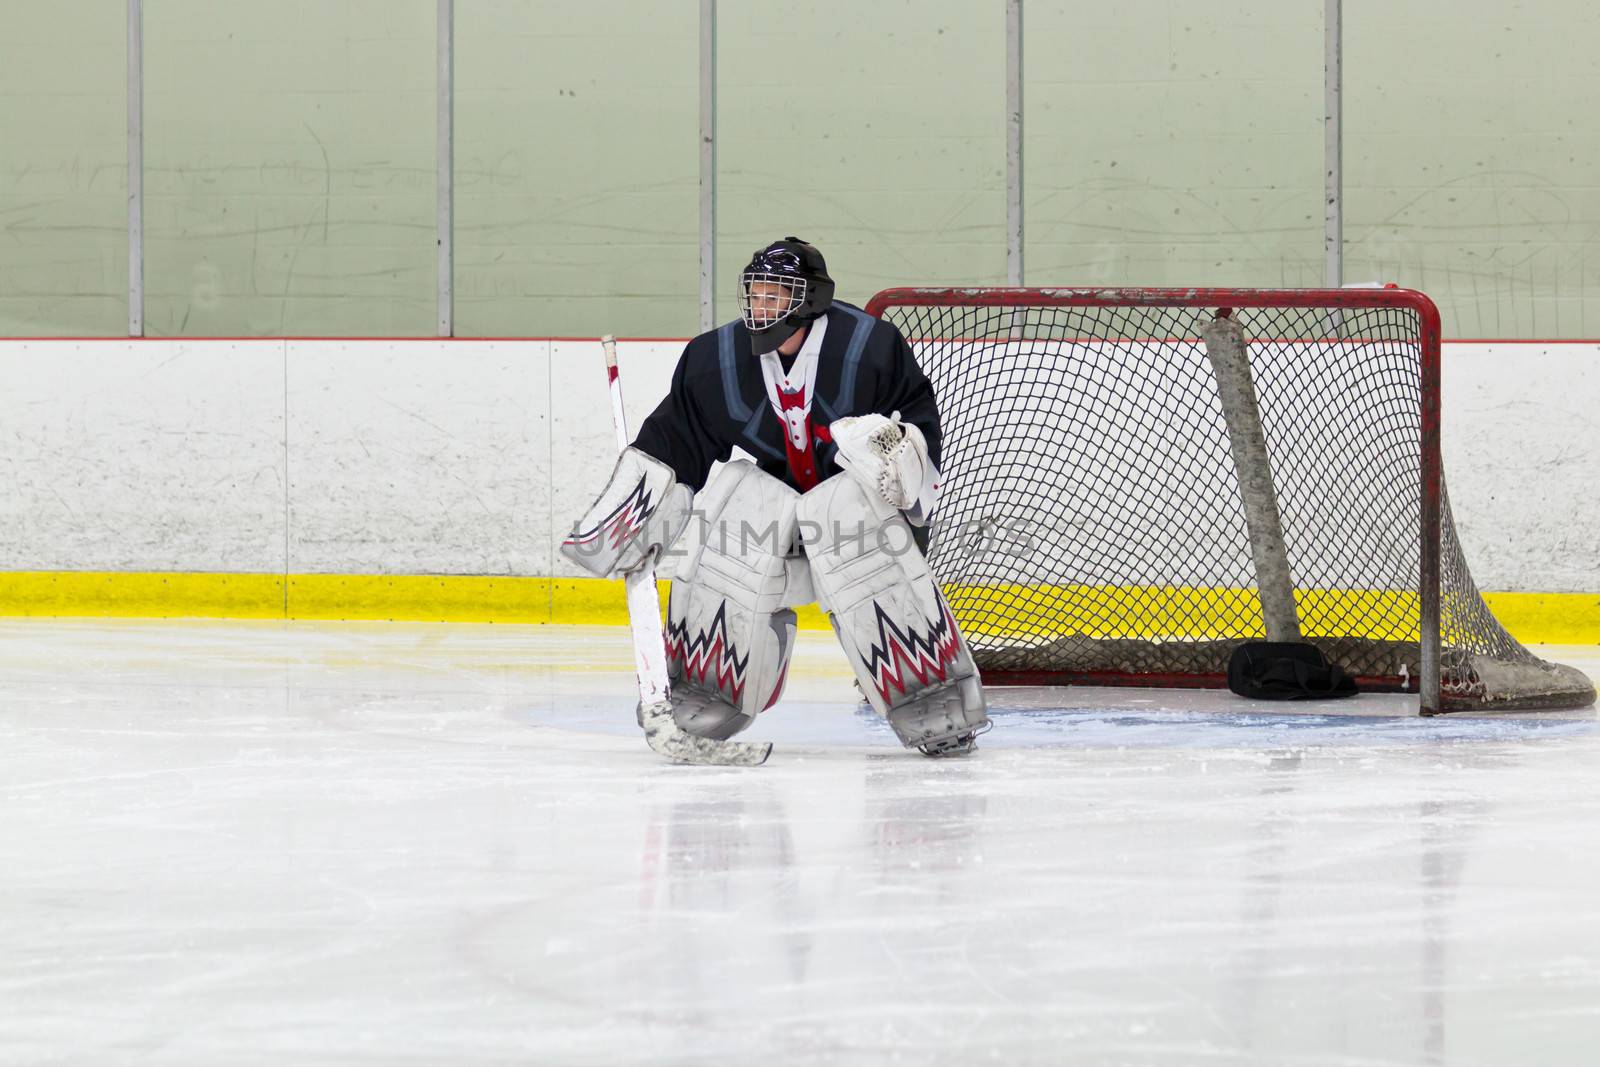 Goalie gets ready for the puck during an ice hockey game by bigjohn36